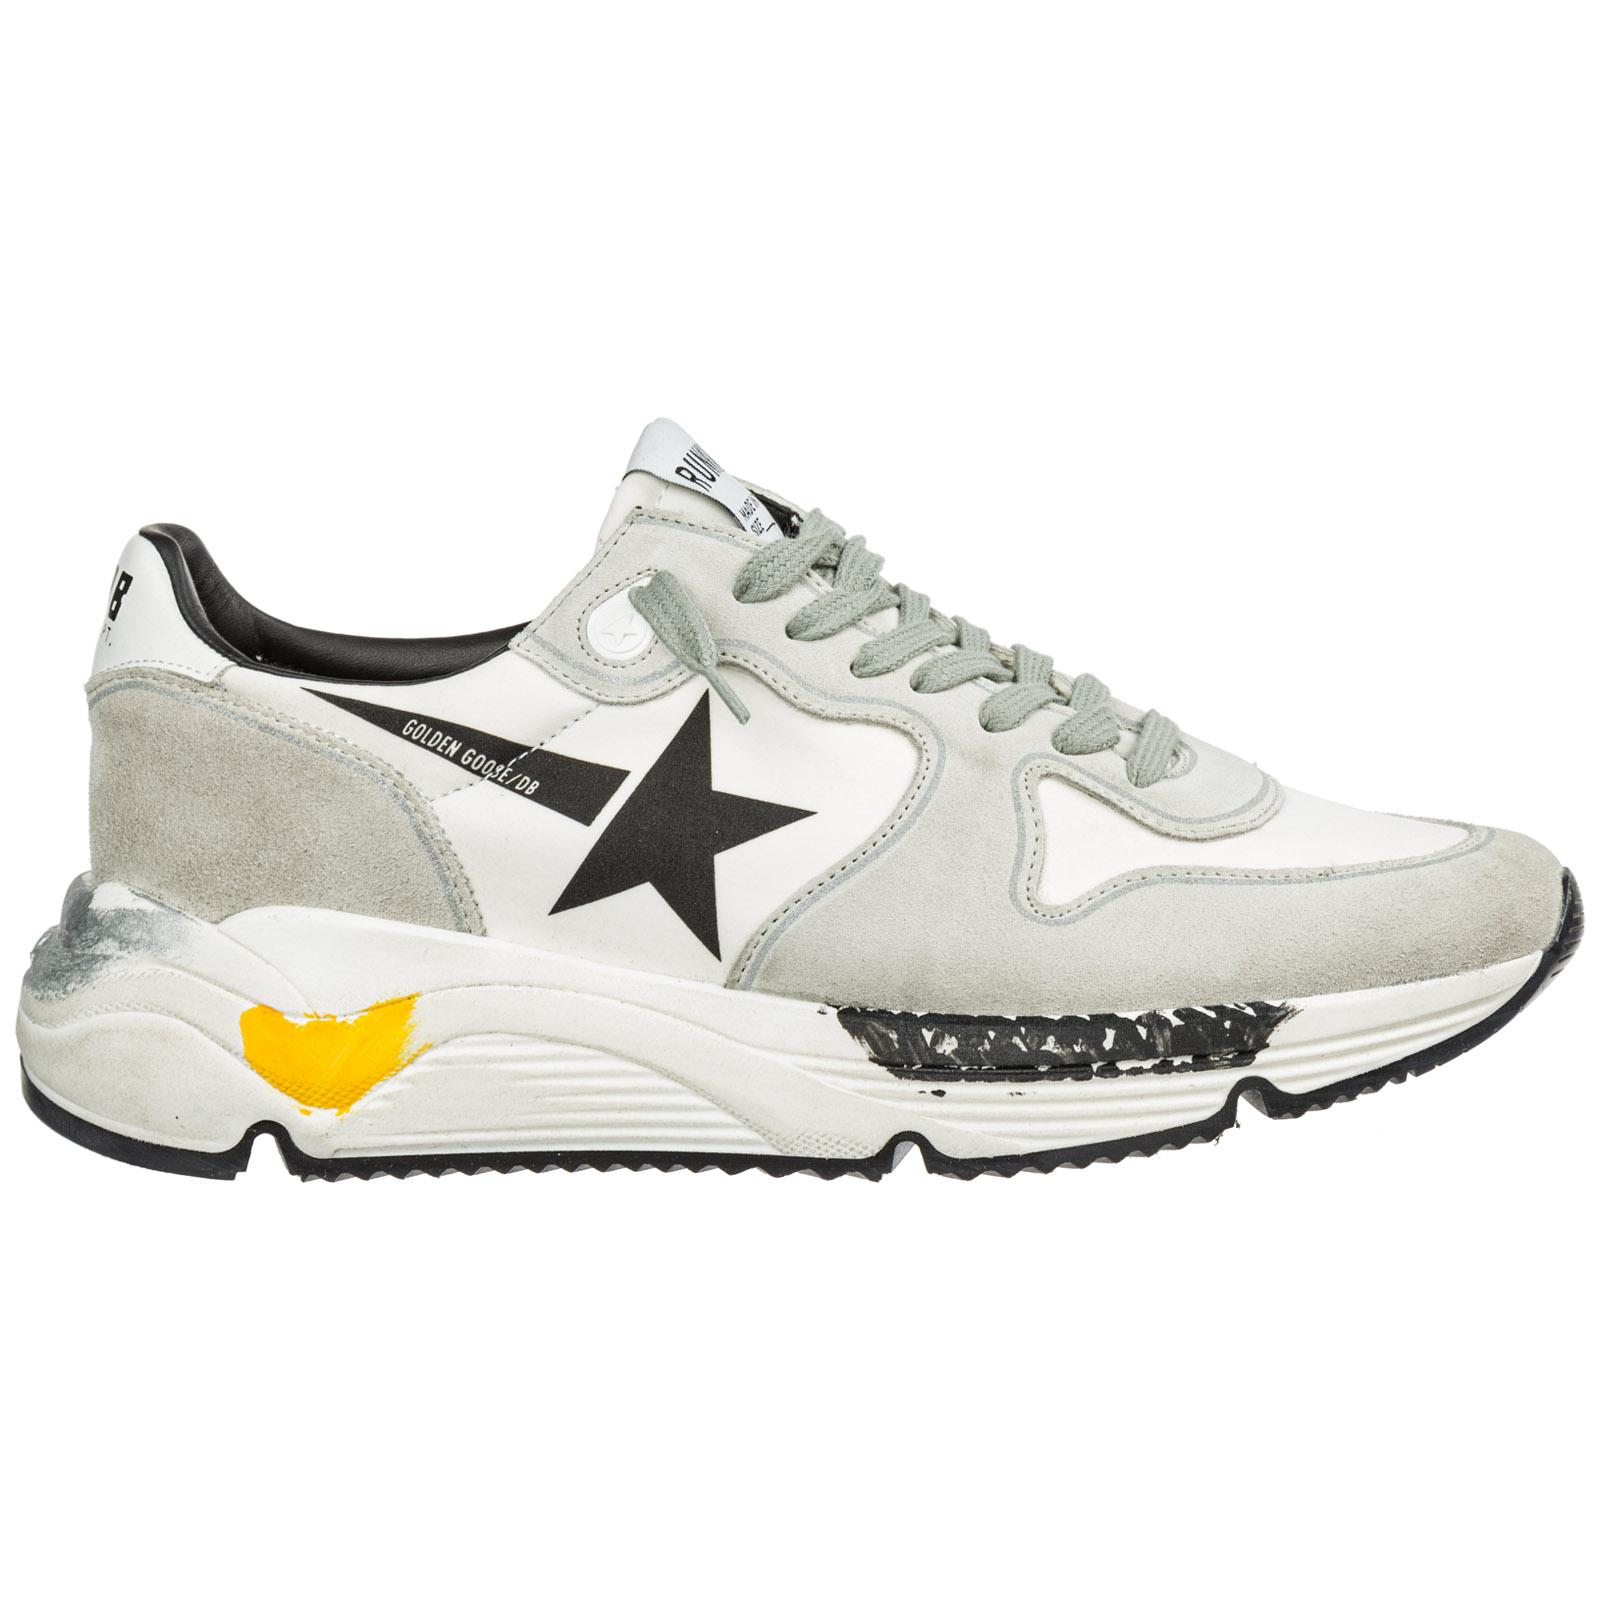 Golden Goose Deluxe Brand Rubber Running Sole Low-top Sneakers in White ...